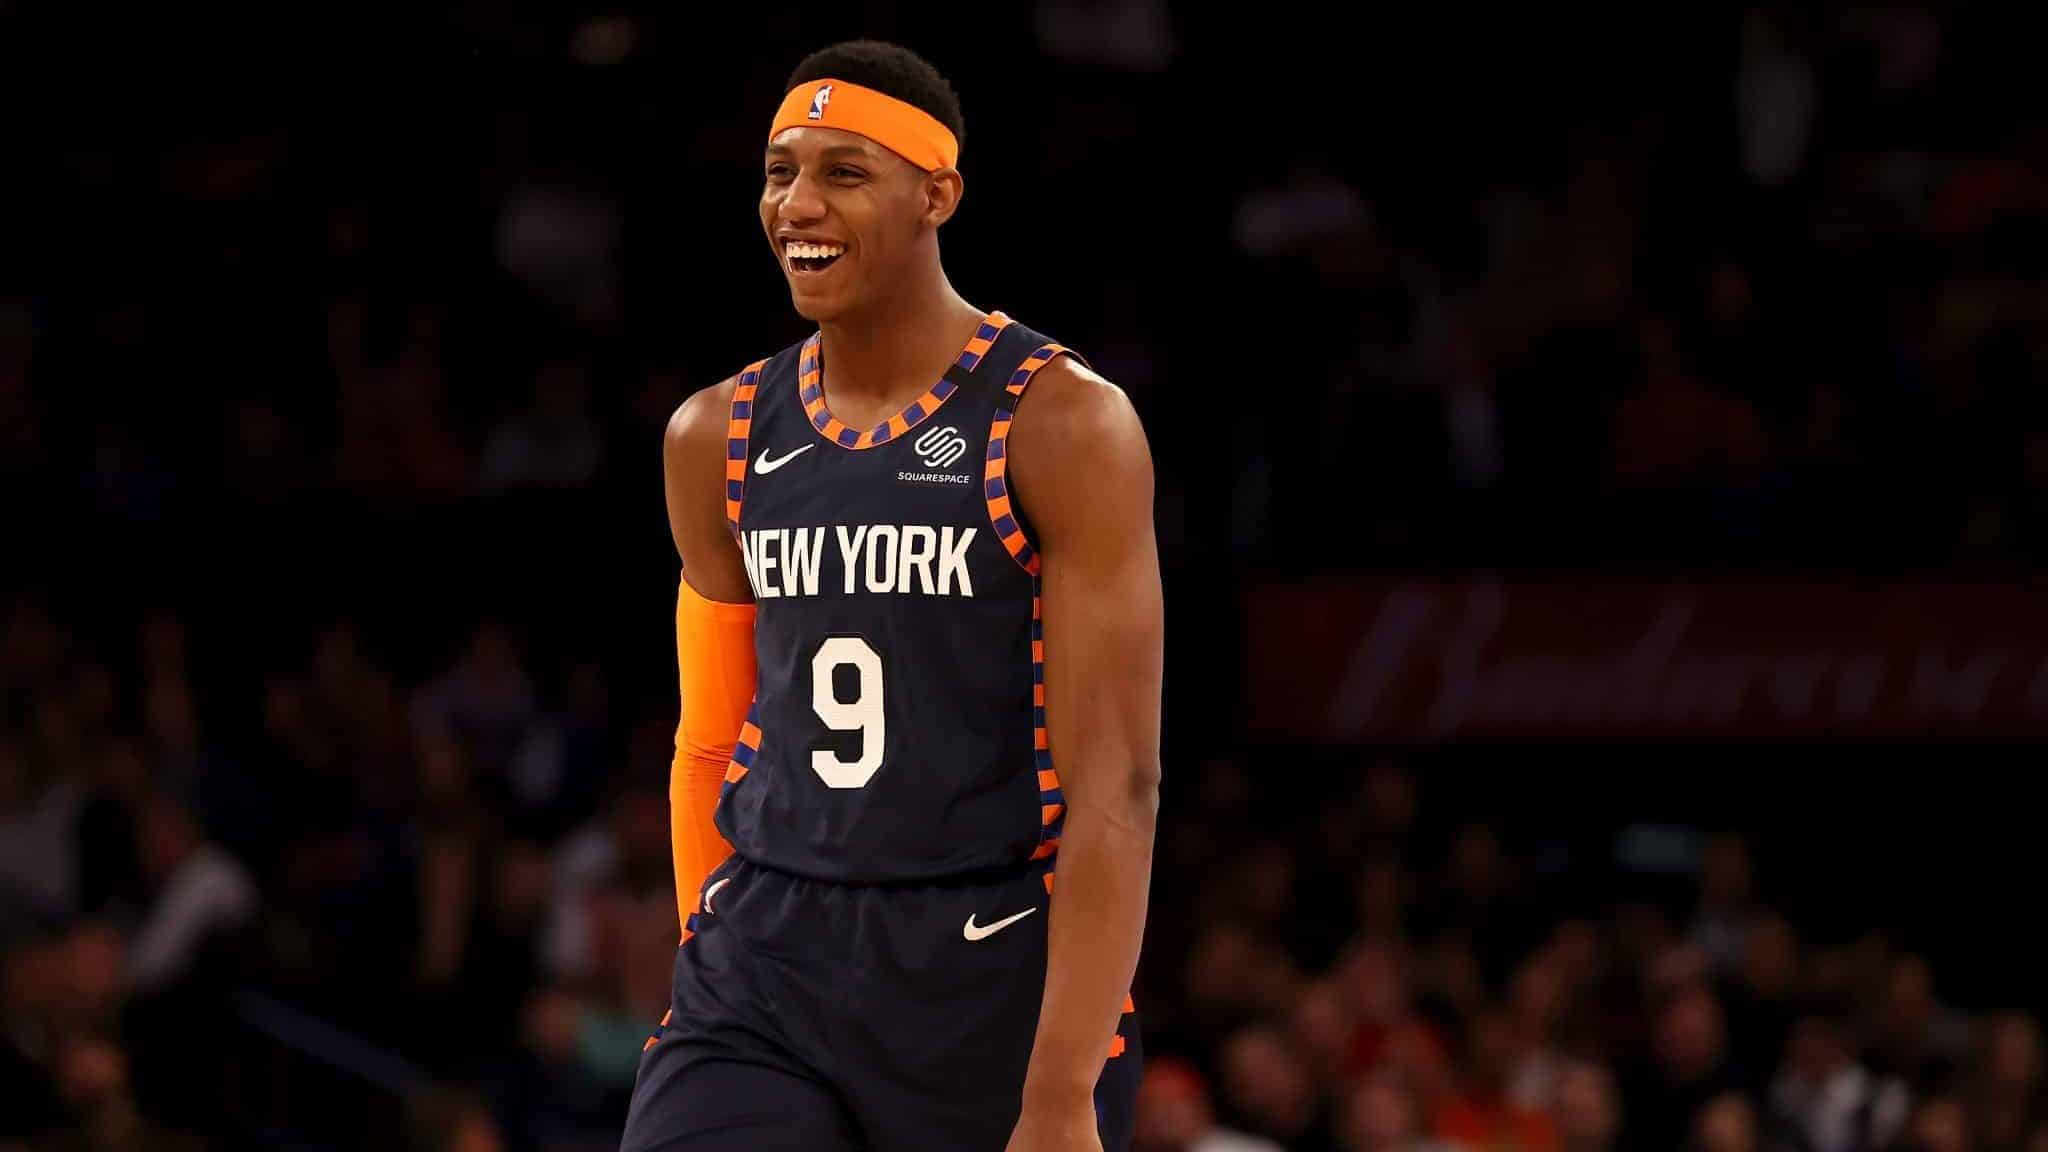 NEW YORK, NEW YORK - FEBRUARY 29: RJ Barrett #9 of the New York Knicks smiles as the clock runs out in the fourth quarter against the Chicago Bulls at Madison Square Garden on February 29, 2020 in New York City.The New York Knicks defeated the Chicago Bulls 125-115.NOTE TO USER: User expressly acknowledges and agrees that, by downloading and or using this photograph, User is consenting to the terms and conditions of the Getty Images License Agreement.